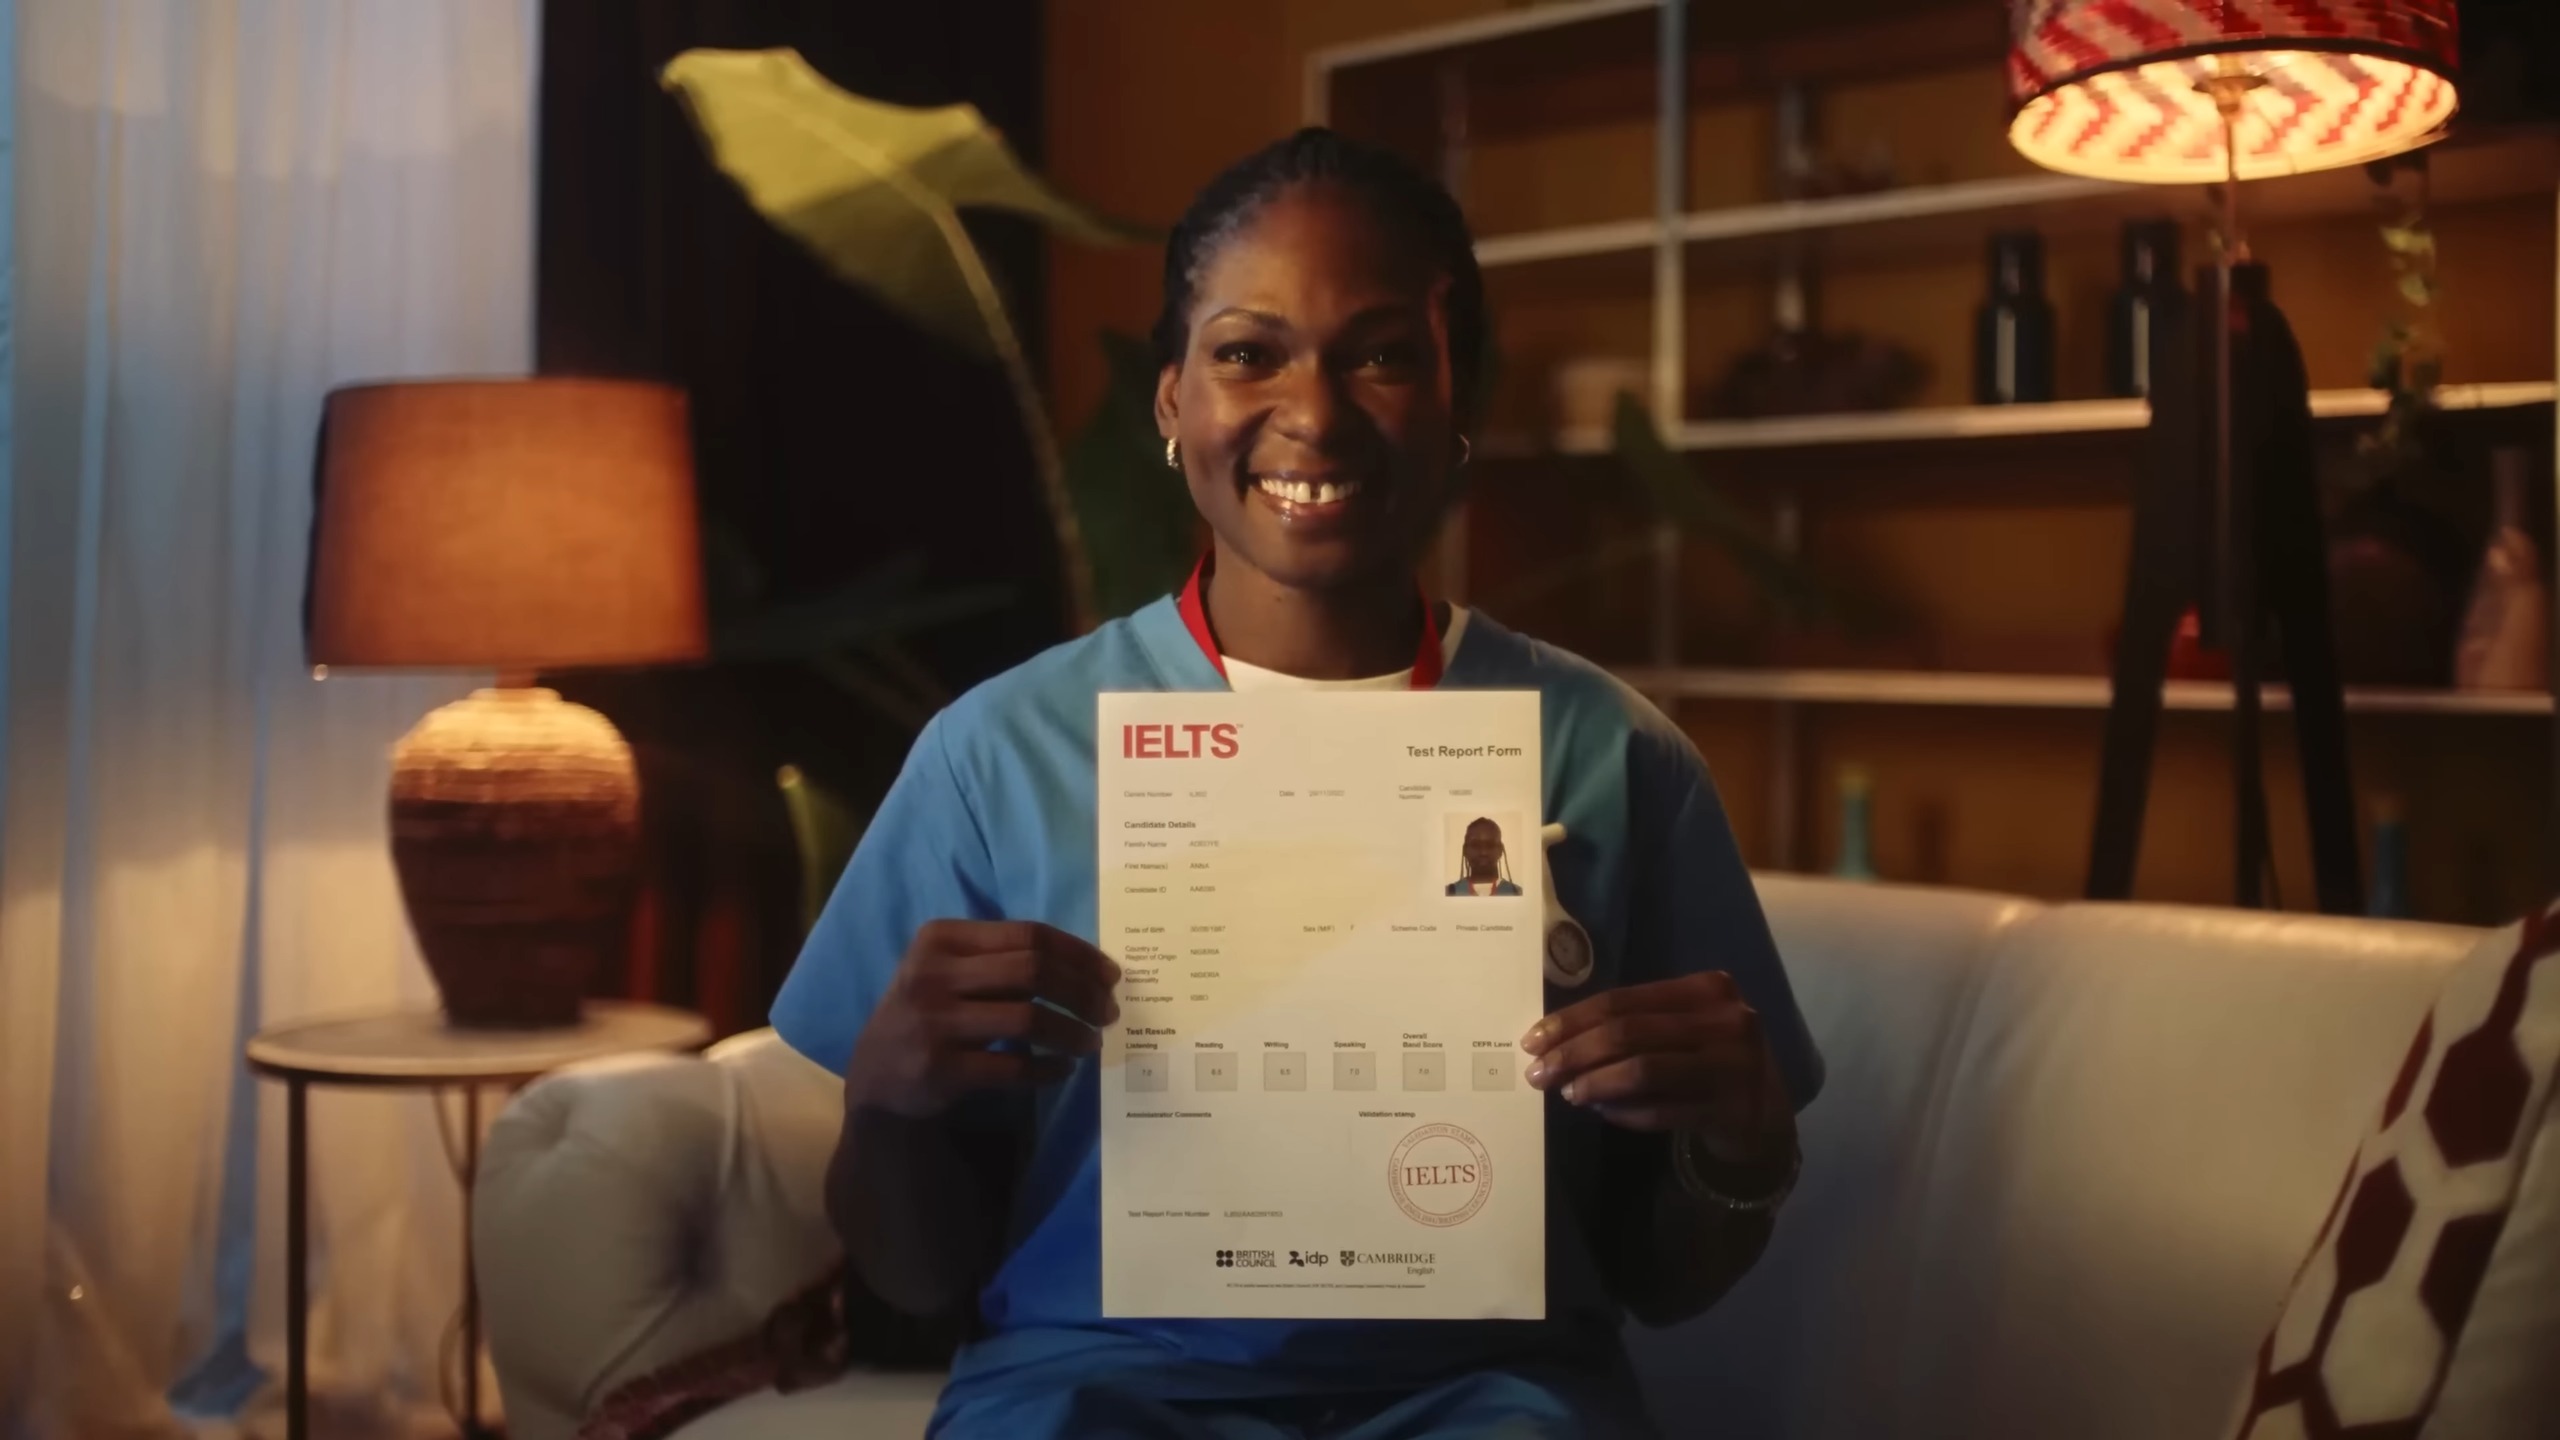 A woman working in the healthcare sector holds an IELTS certificate